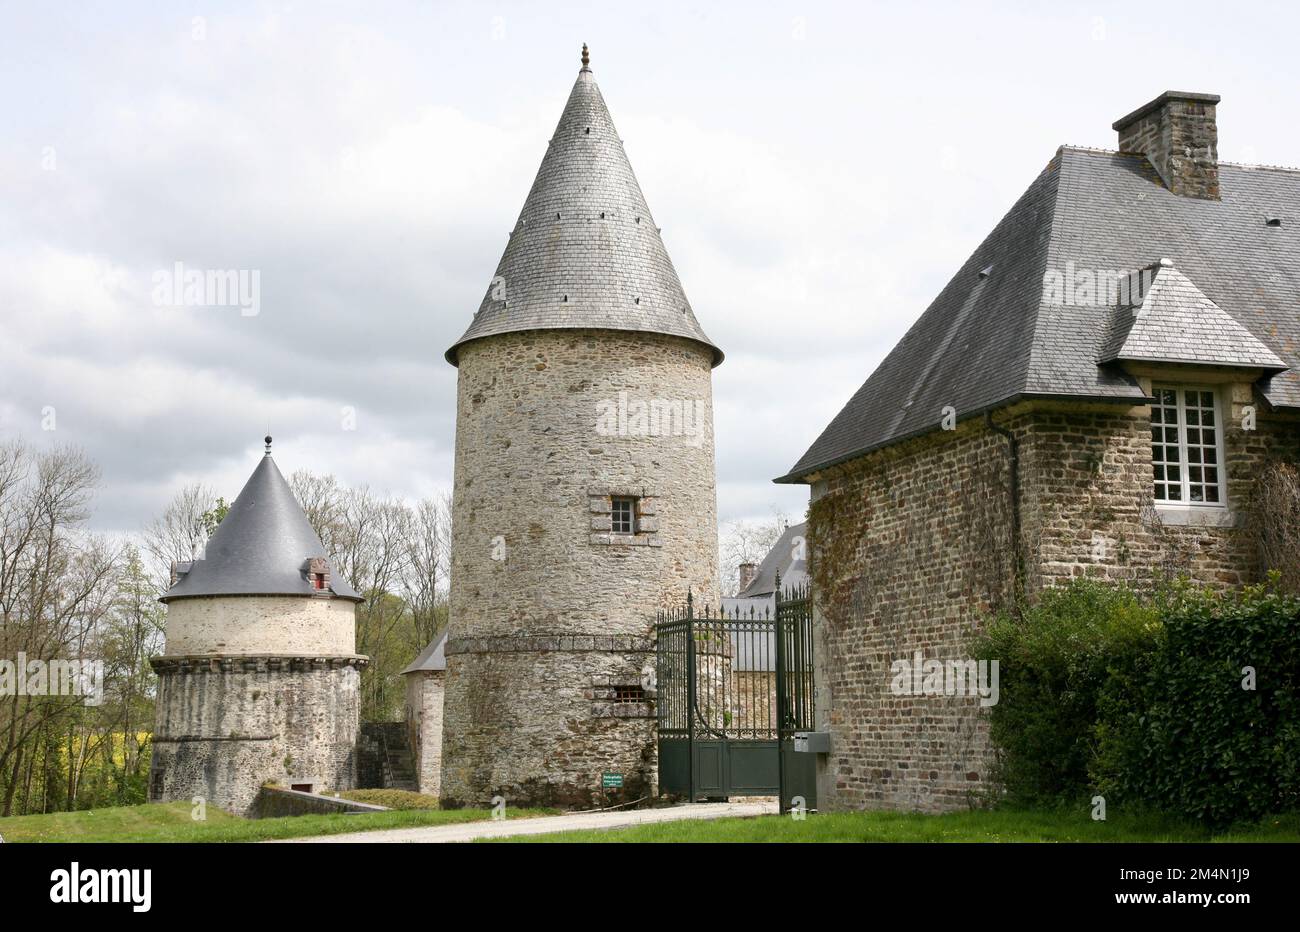 A view of the old medieval towers at Chateau de Canisy in the village of Canisy, Normandy, France, Europe Stock Photo